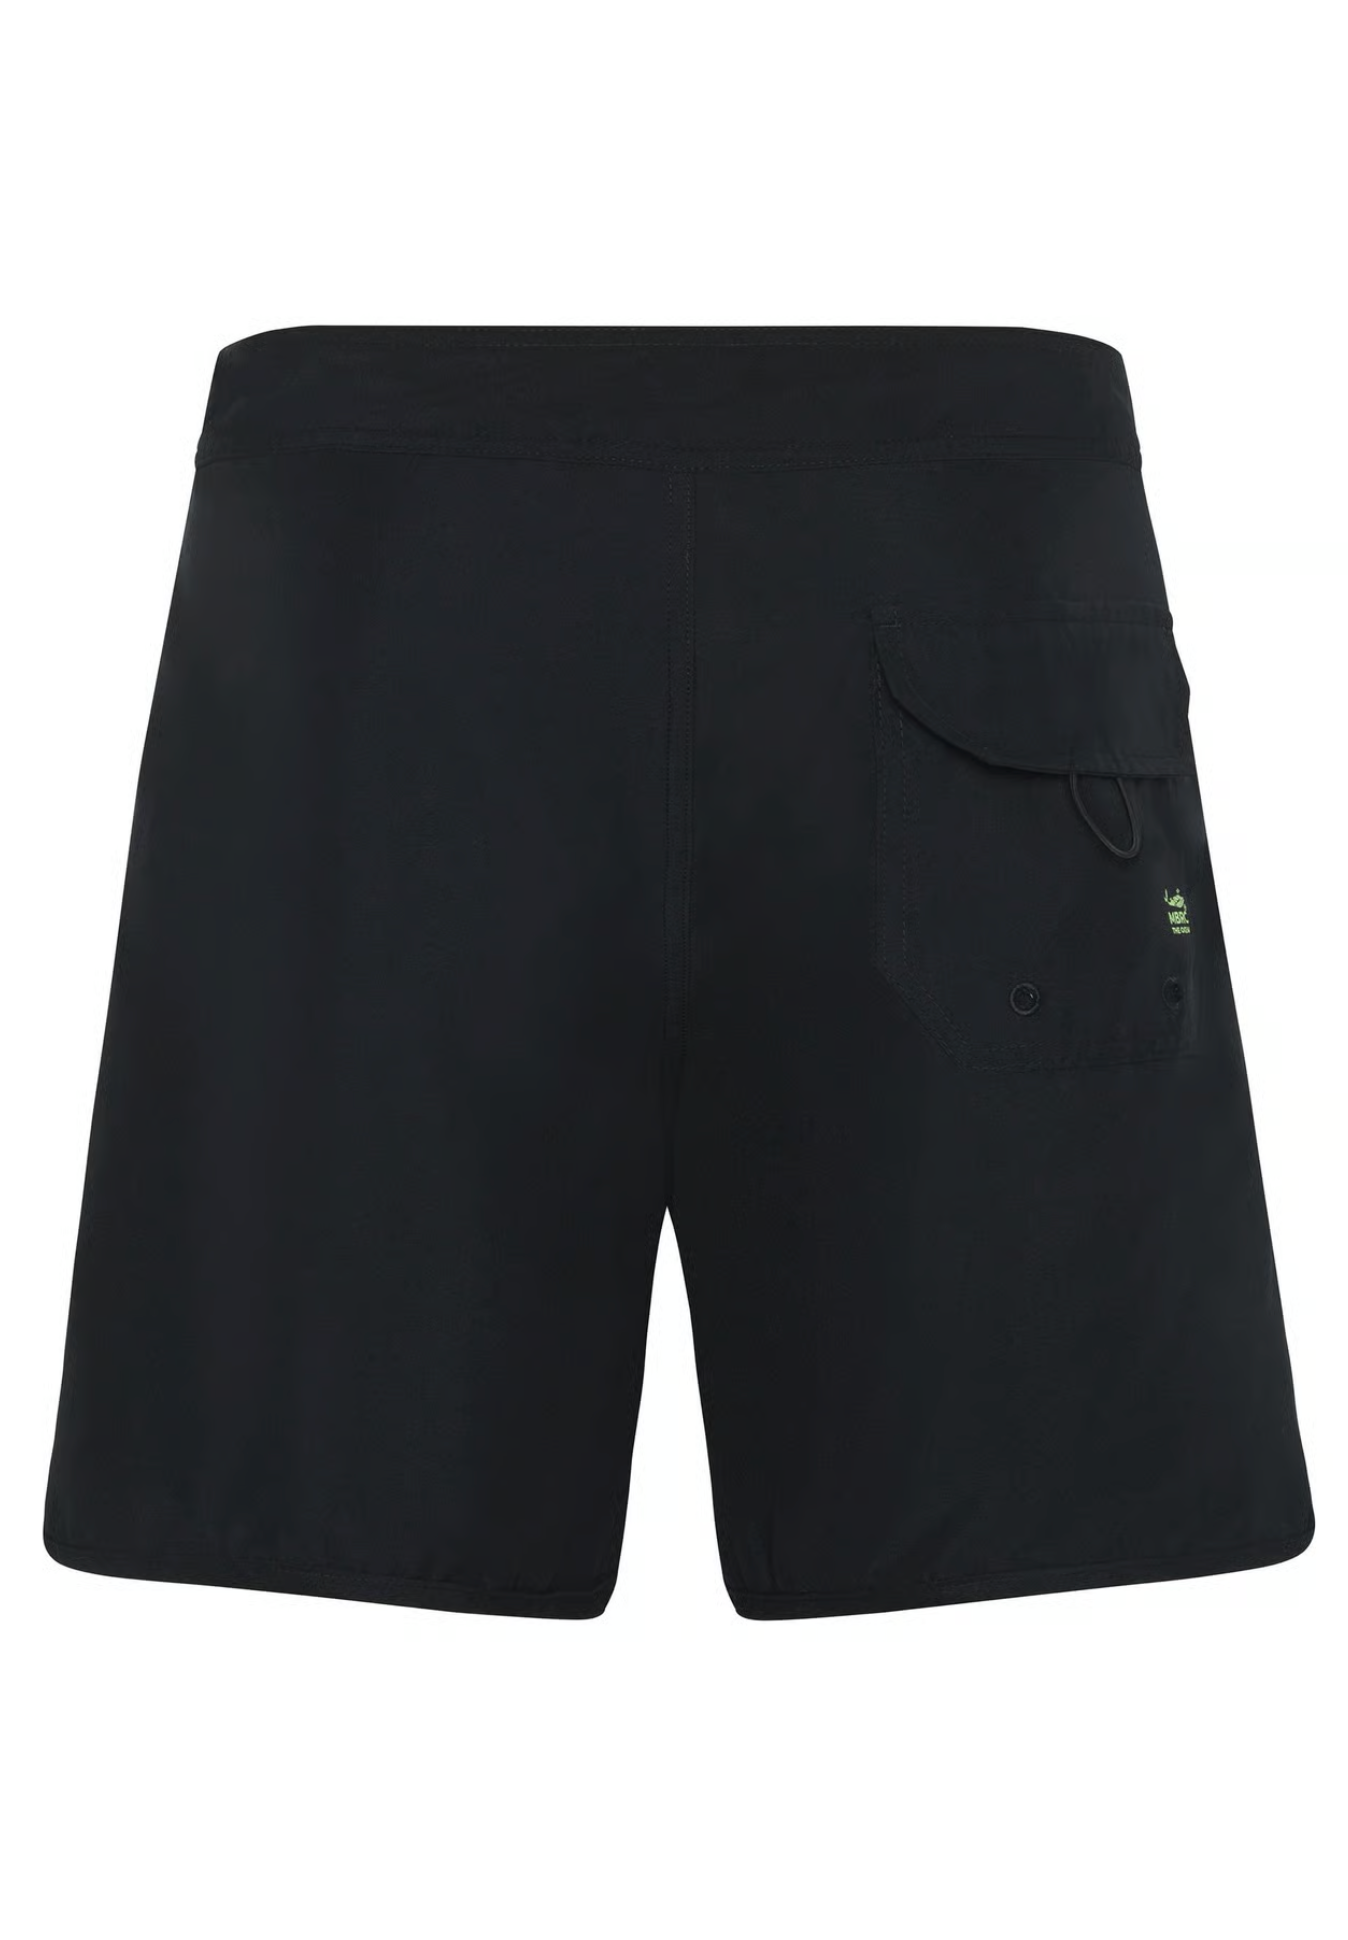 MBRC x Chiemsee Swimshorts